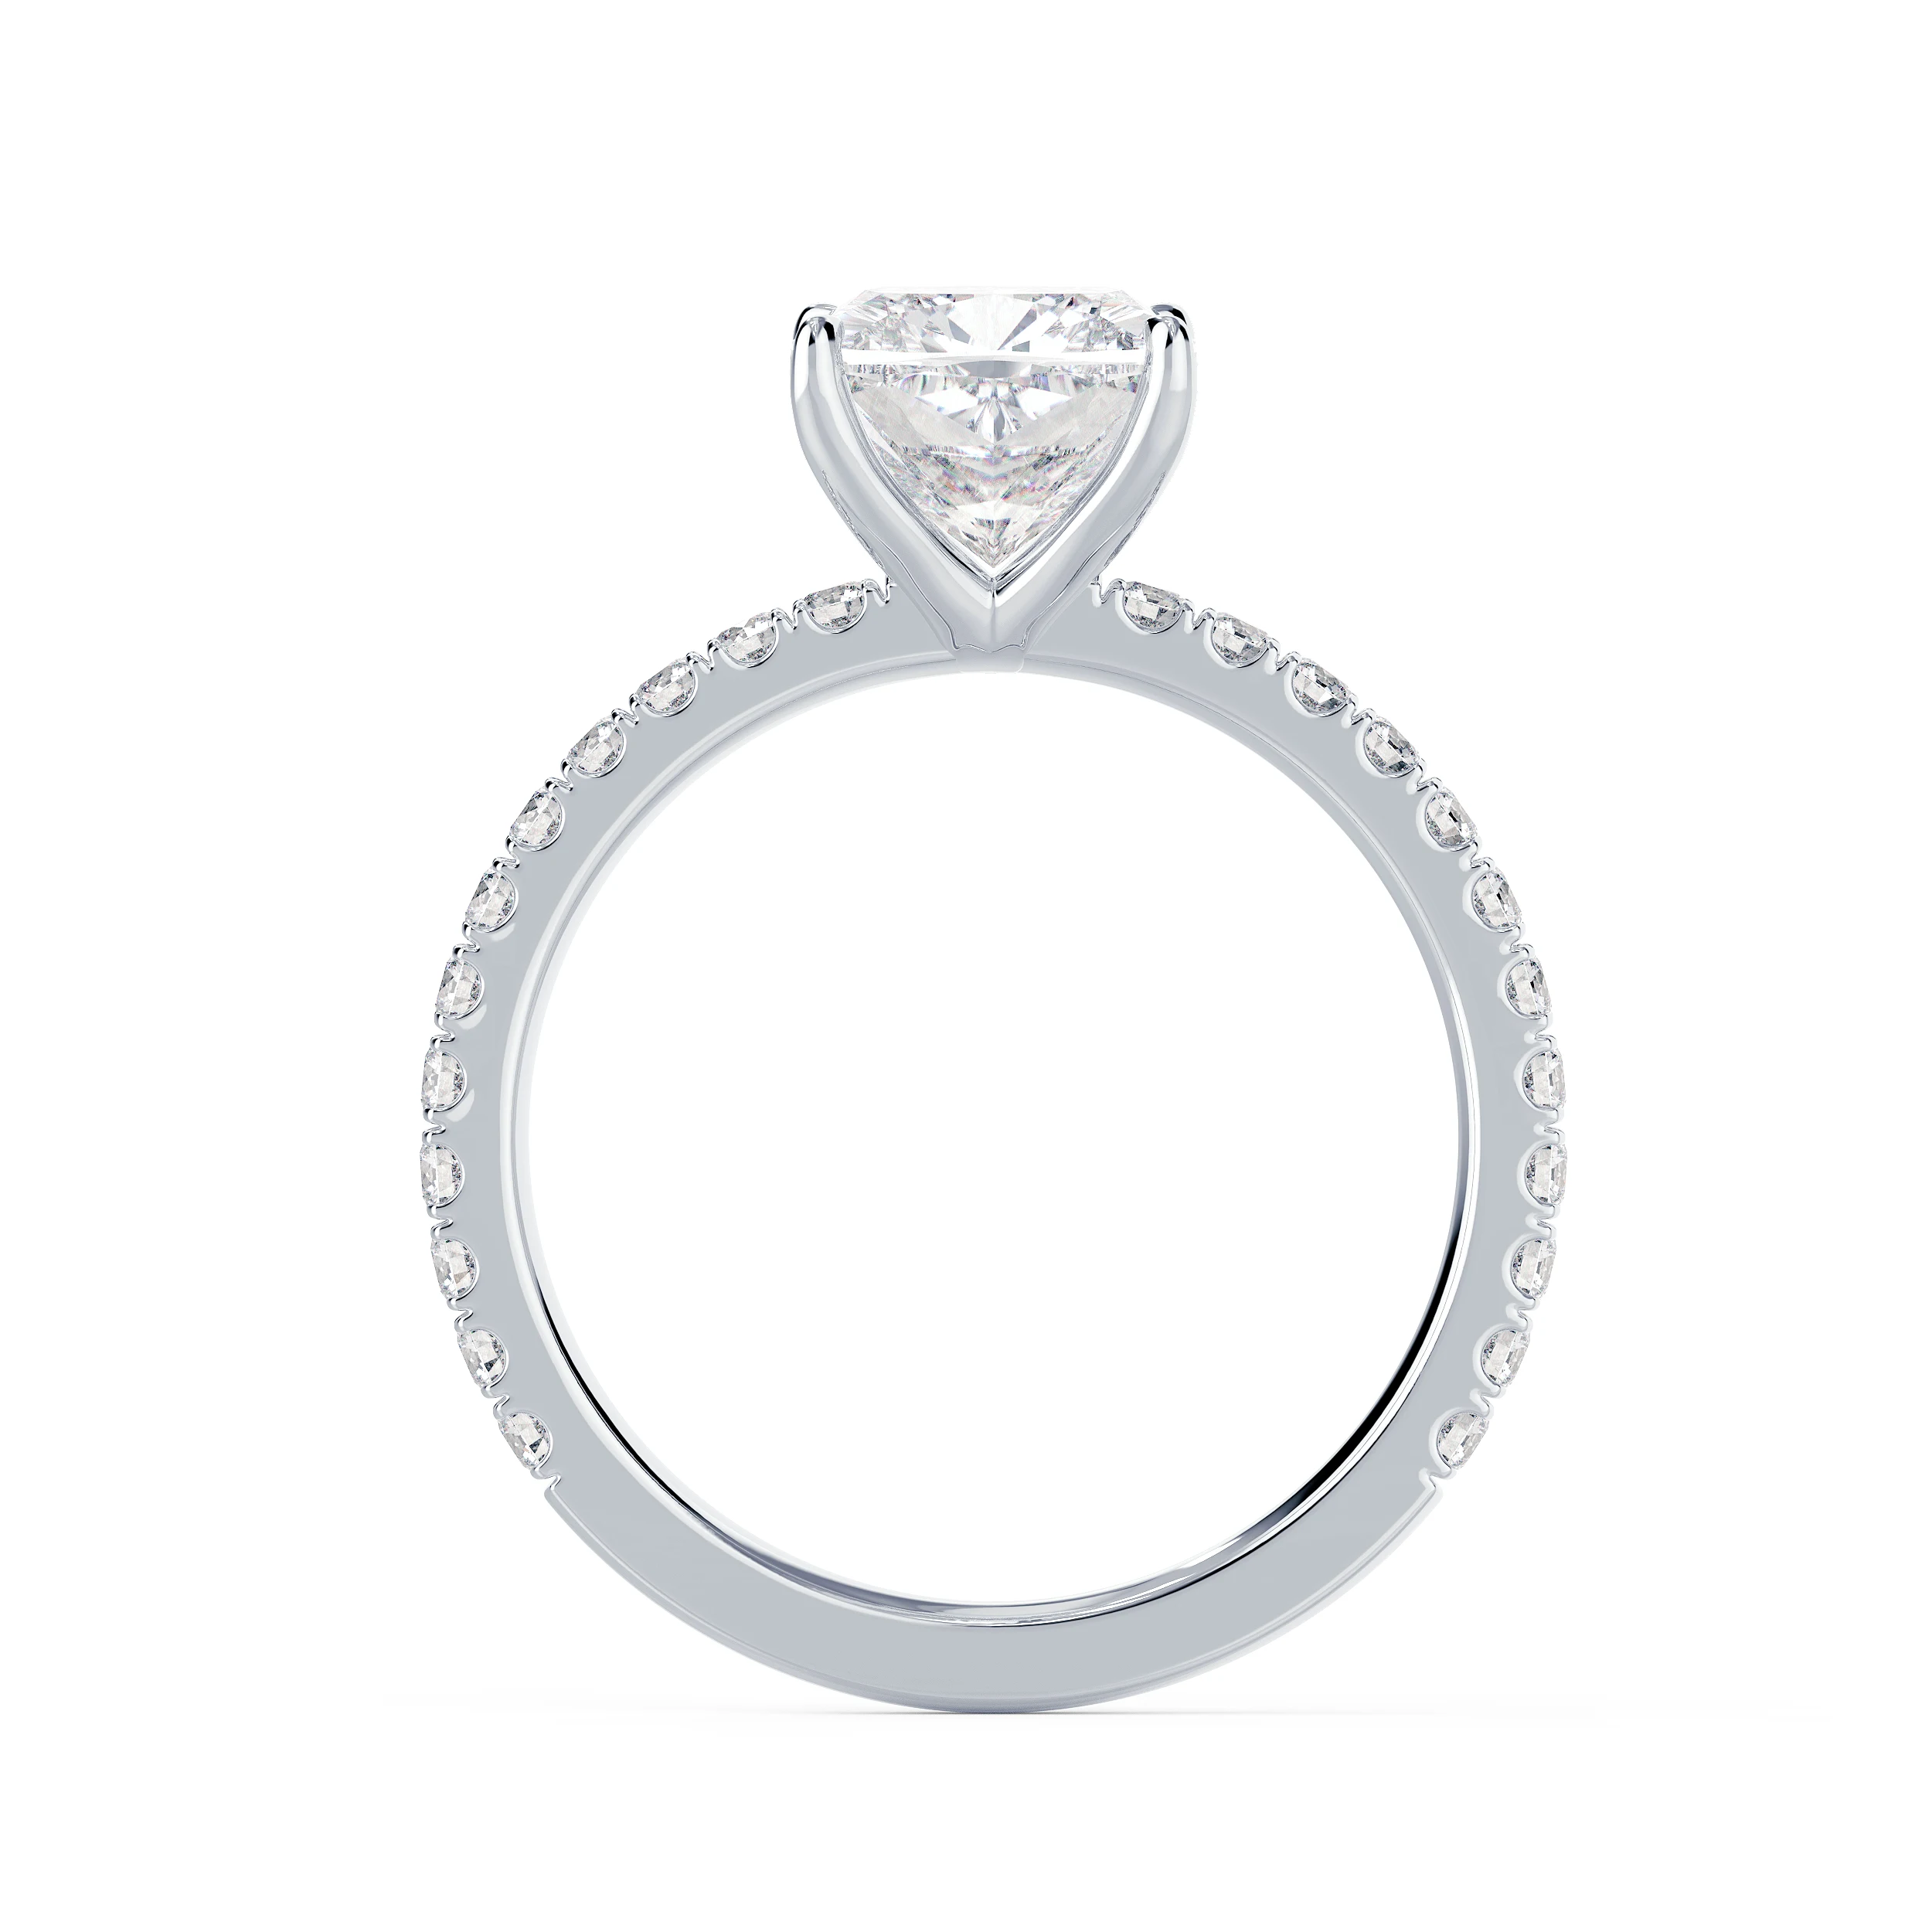 White Gold Cushion Classic Four Prong Pavé Diamond Engagement Ring featuring Hand Selected Lab Created Diamonds (Profile View)